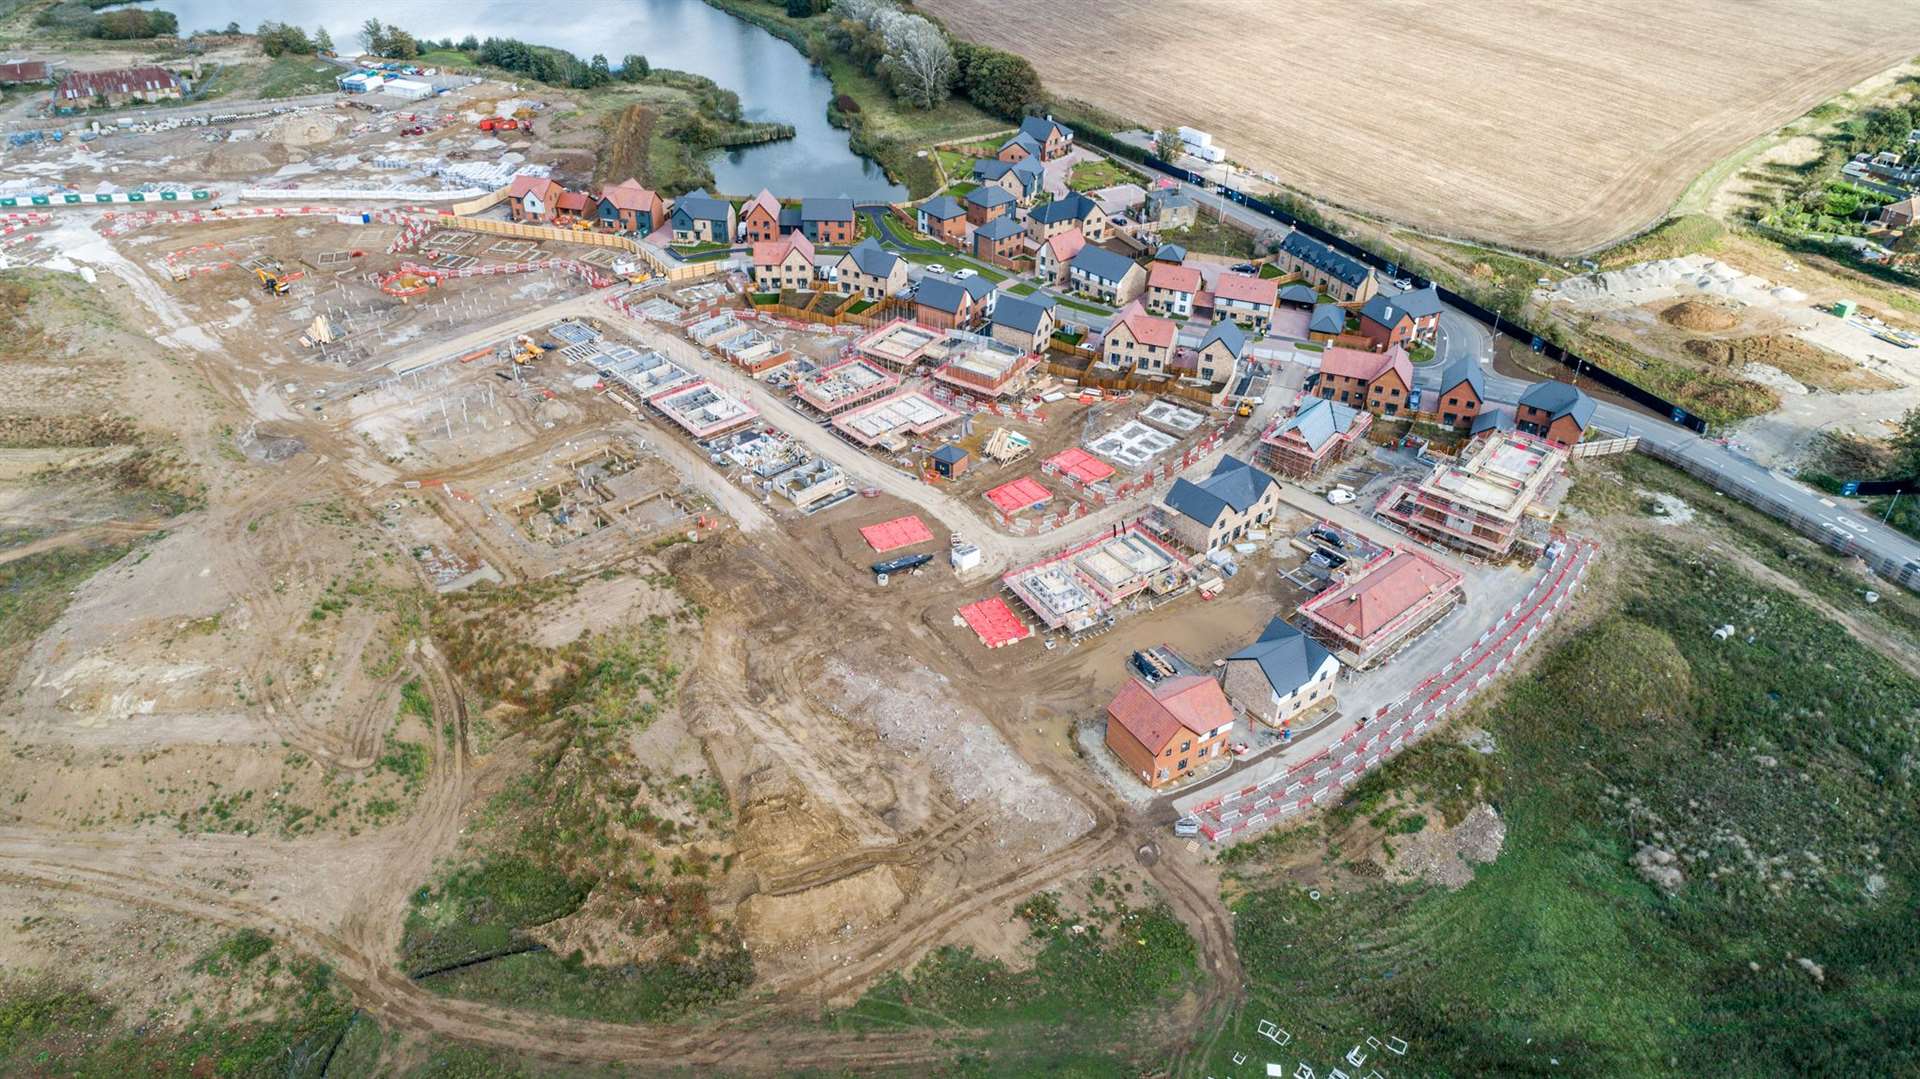 The Oare Lakes development is progressing, but soon there could be thousands more homes built in Faversham